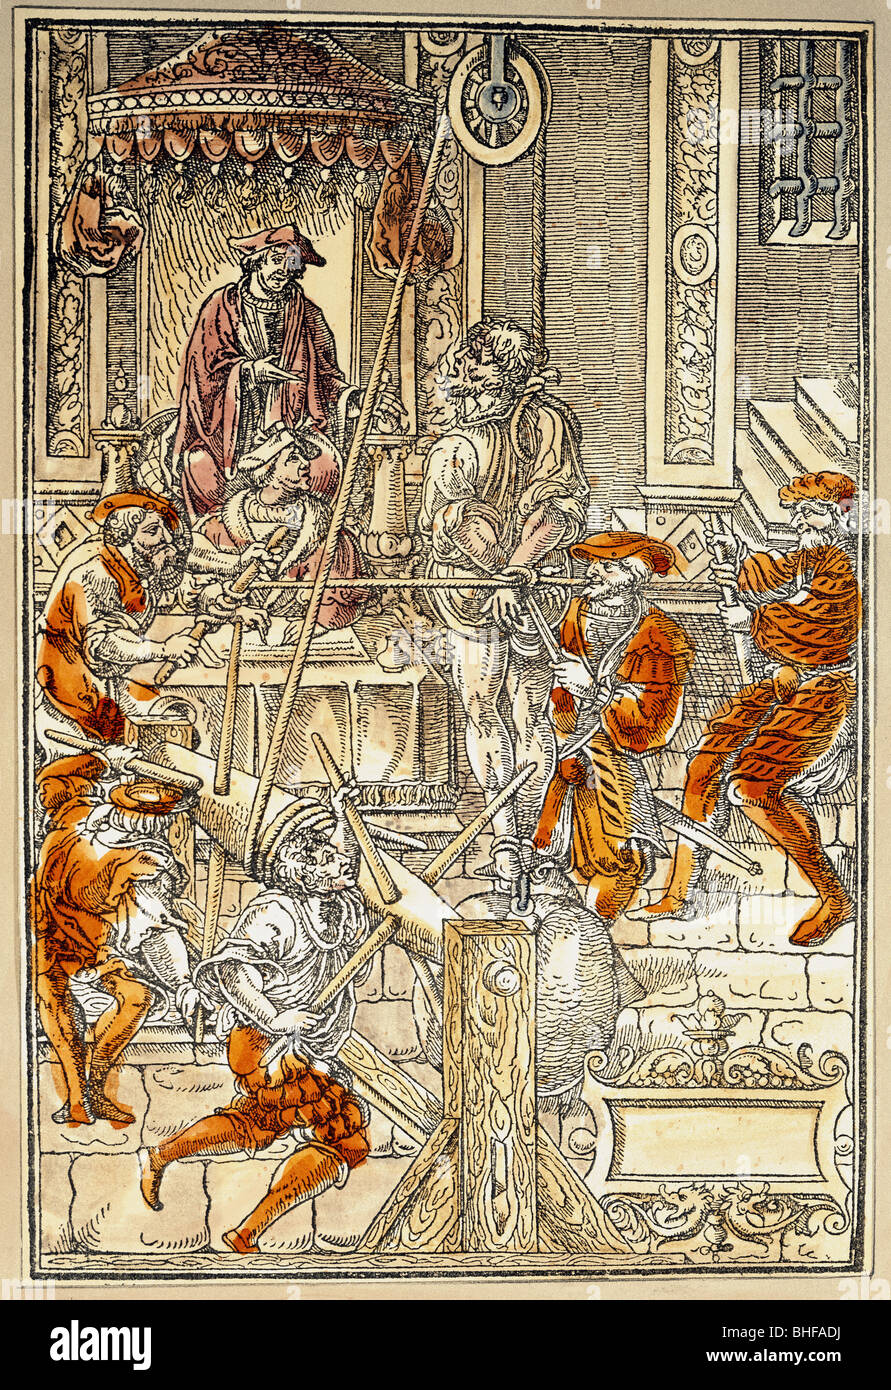 justice, torture, streching, coloured woodcut, Johannes Millaeus 'Praxis criminalis', printed by Colinaeus, Paris, 1541, private collection, , Stock Photo